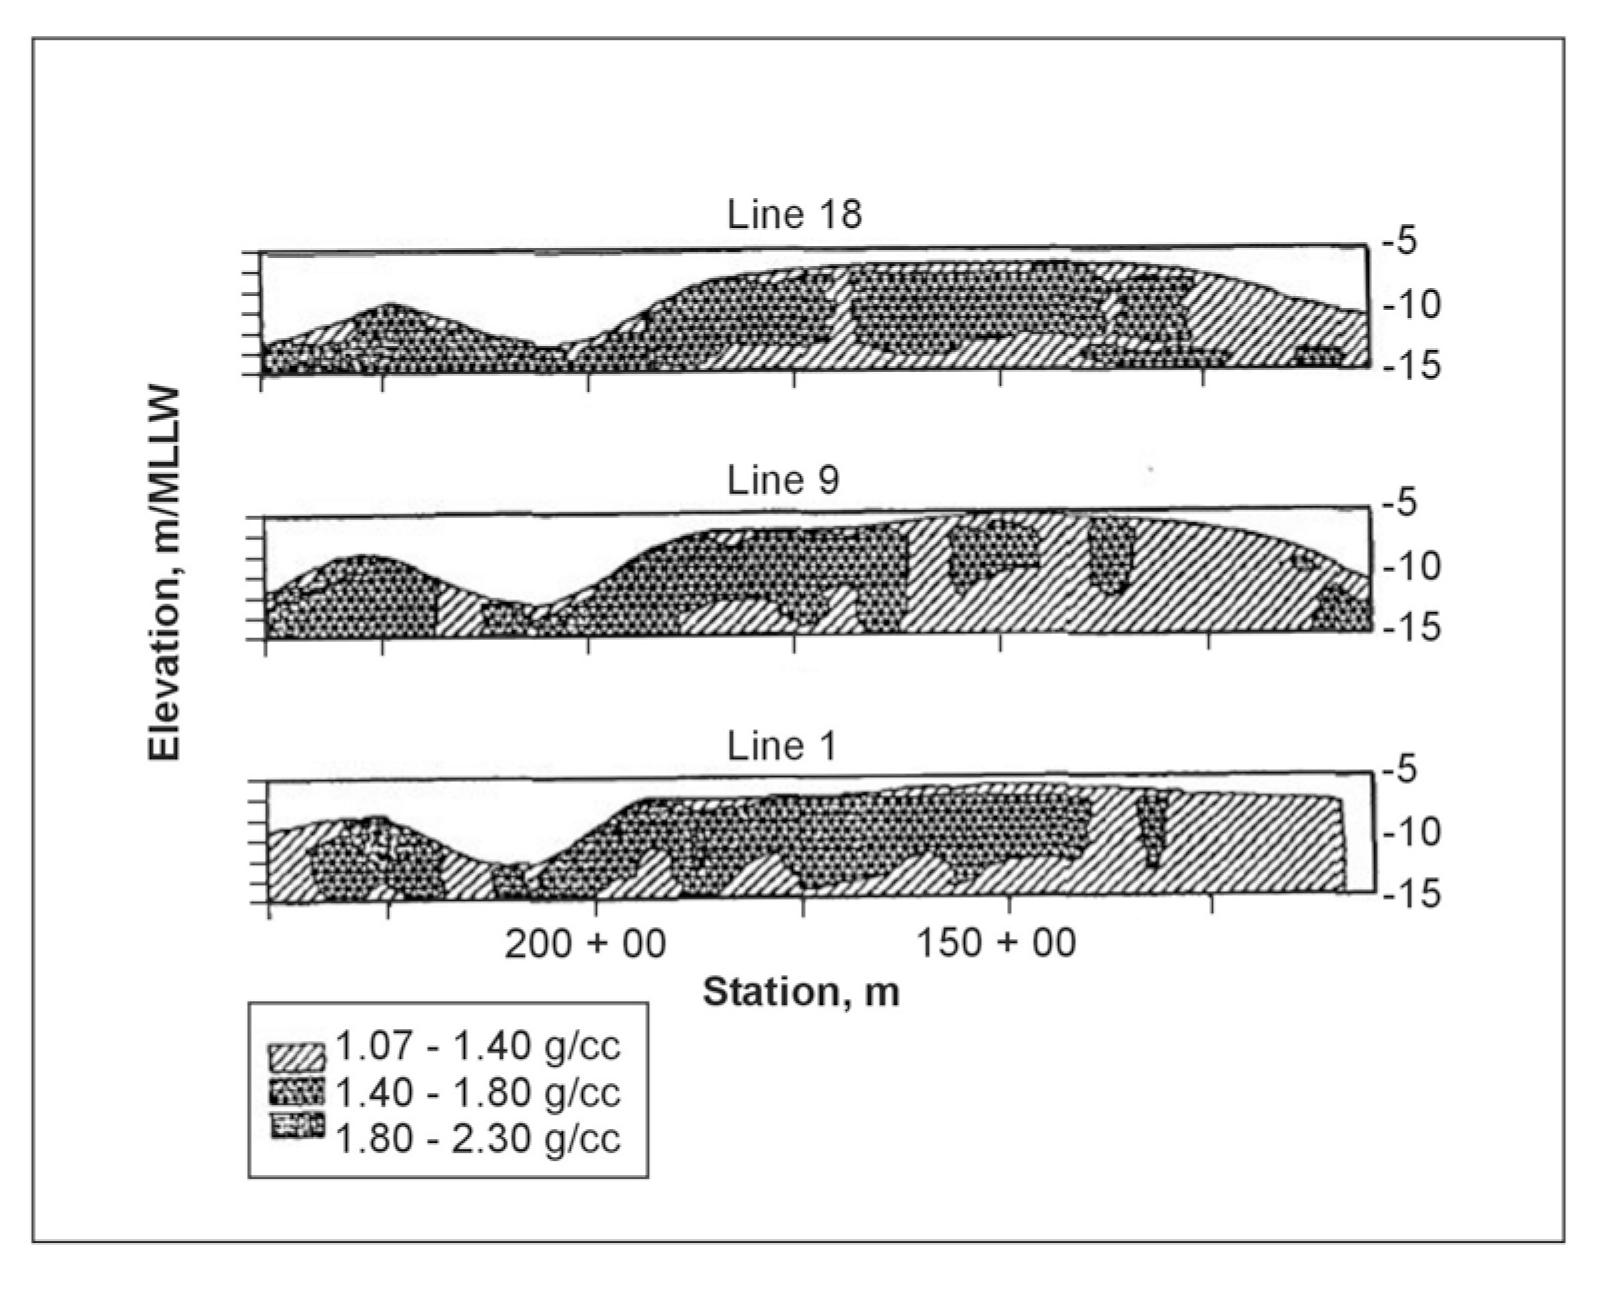 Density cross section in Gulfport ship canal, Mississippi. (Ballard. McGee and Whalin 1992).